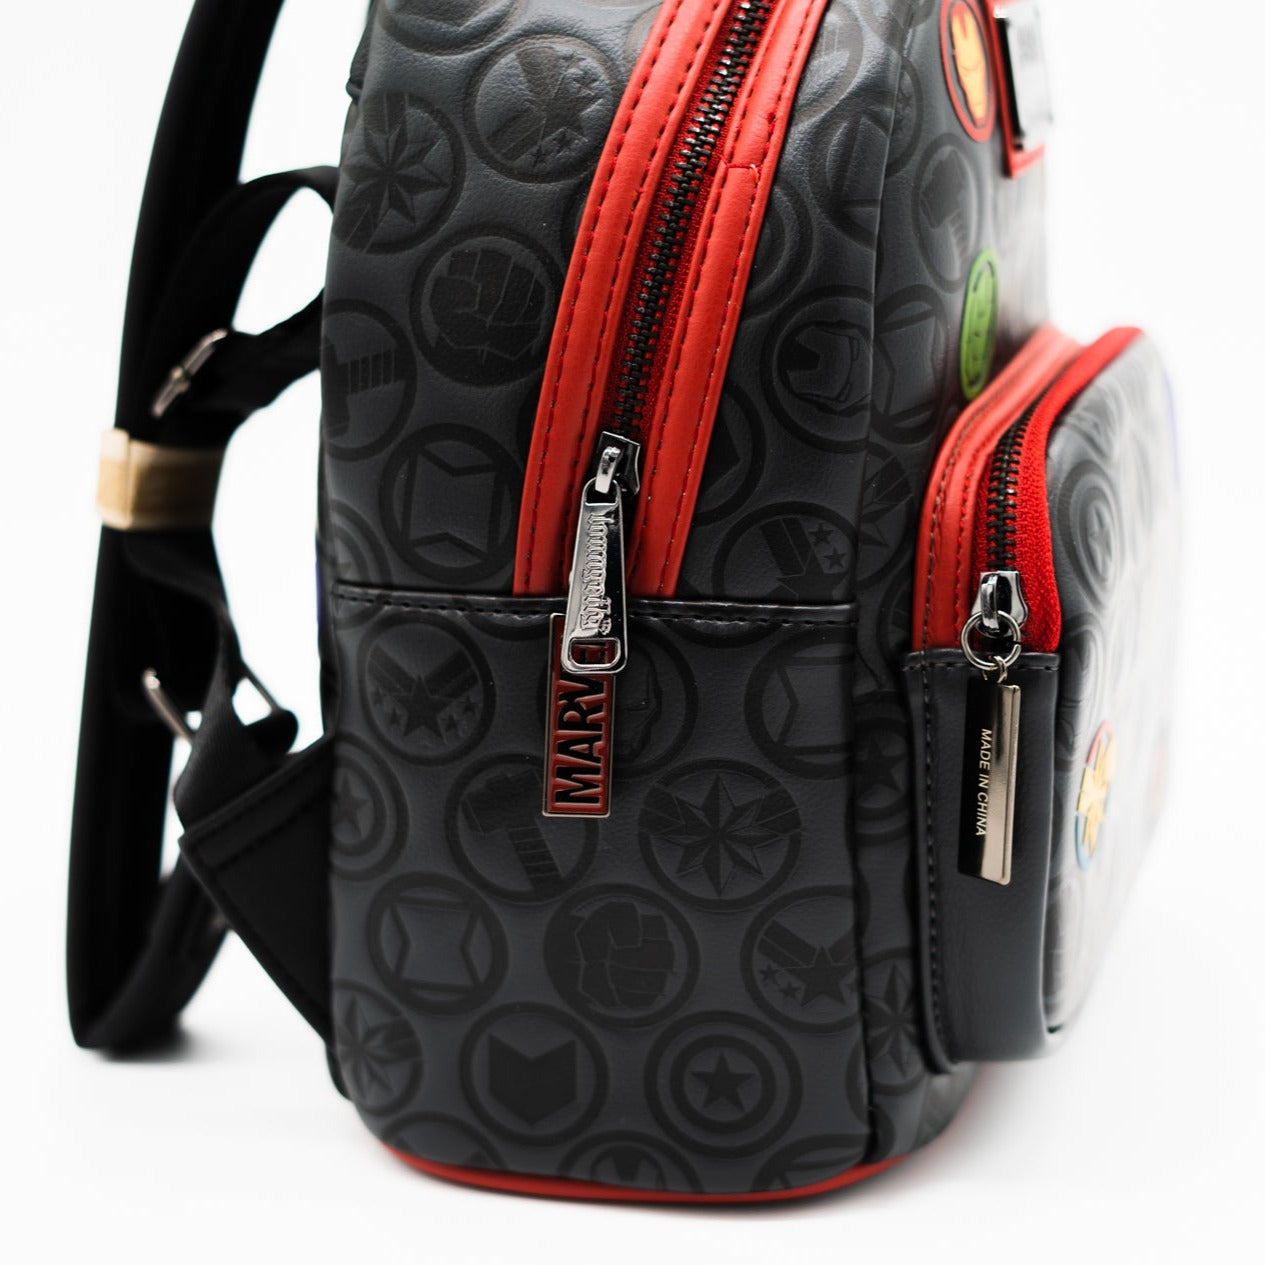 Loungefly x Marvel Avengers Debossed Icons AOP Mini Backpack